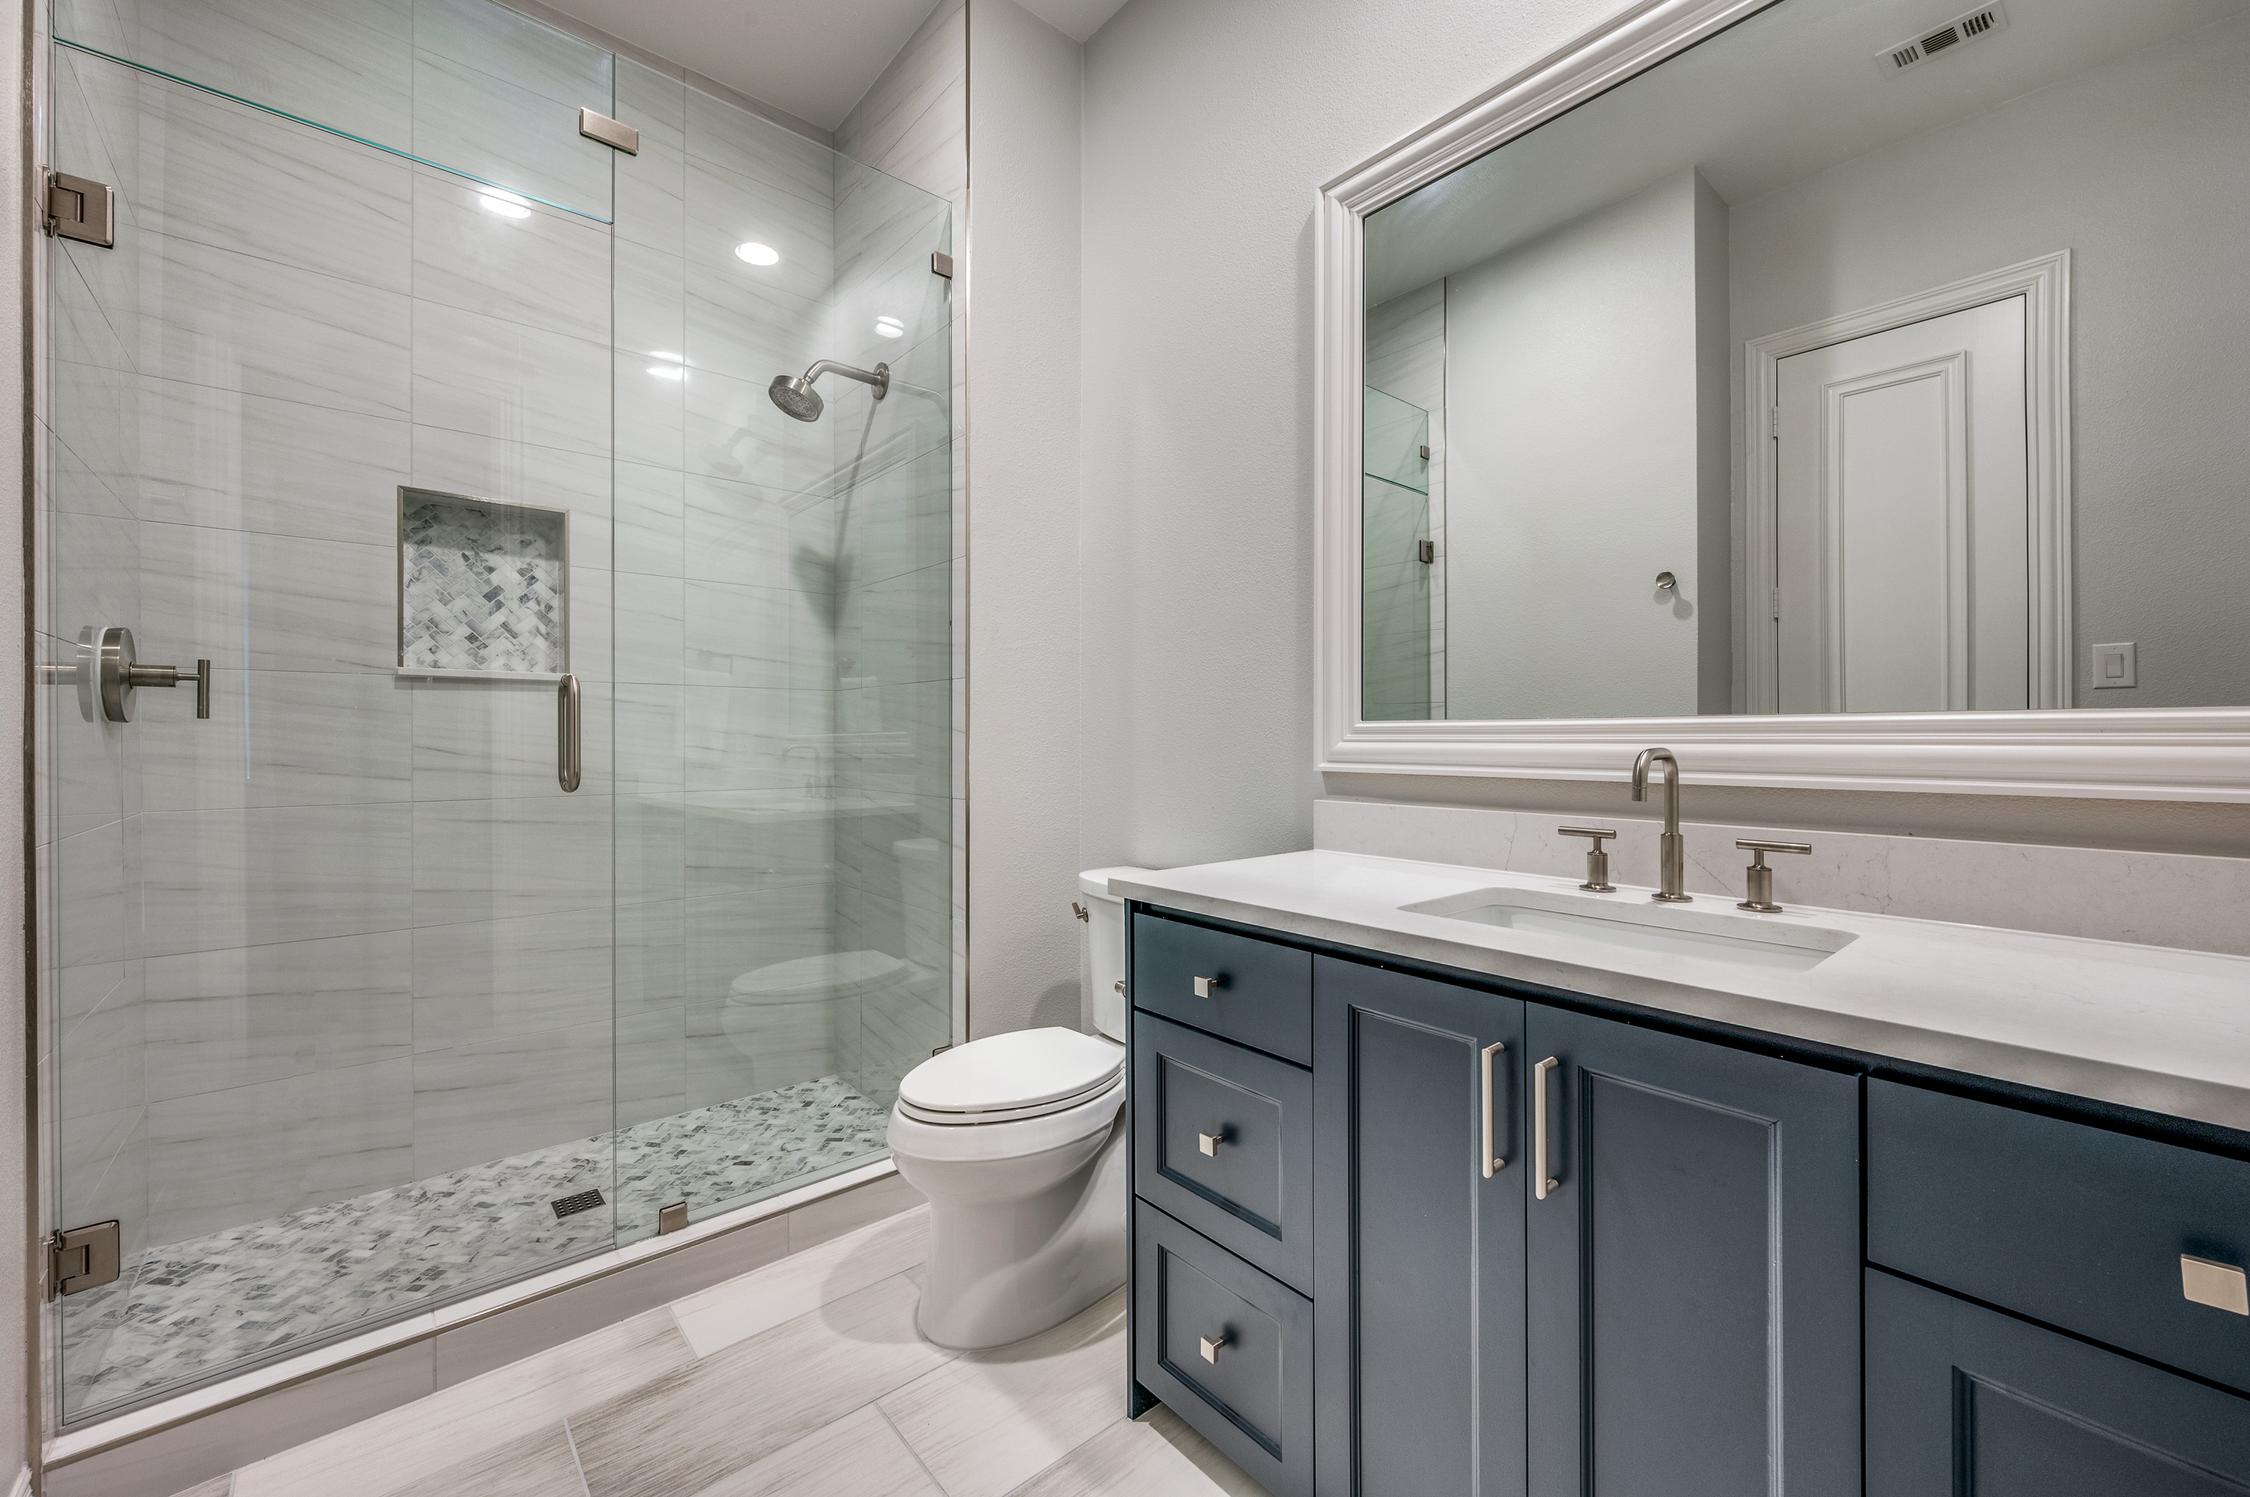 Home Remodeling Projectby DFW Improved in Bathroom Remodels in Plano, Texas